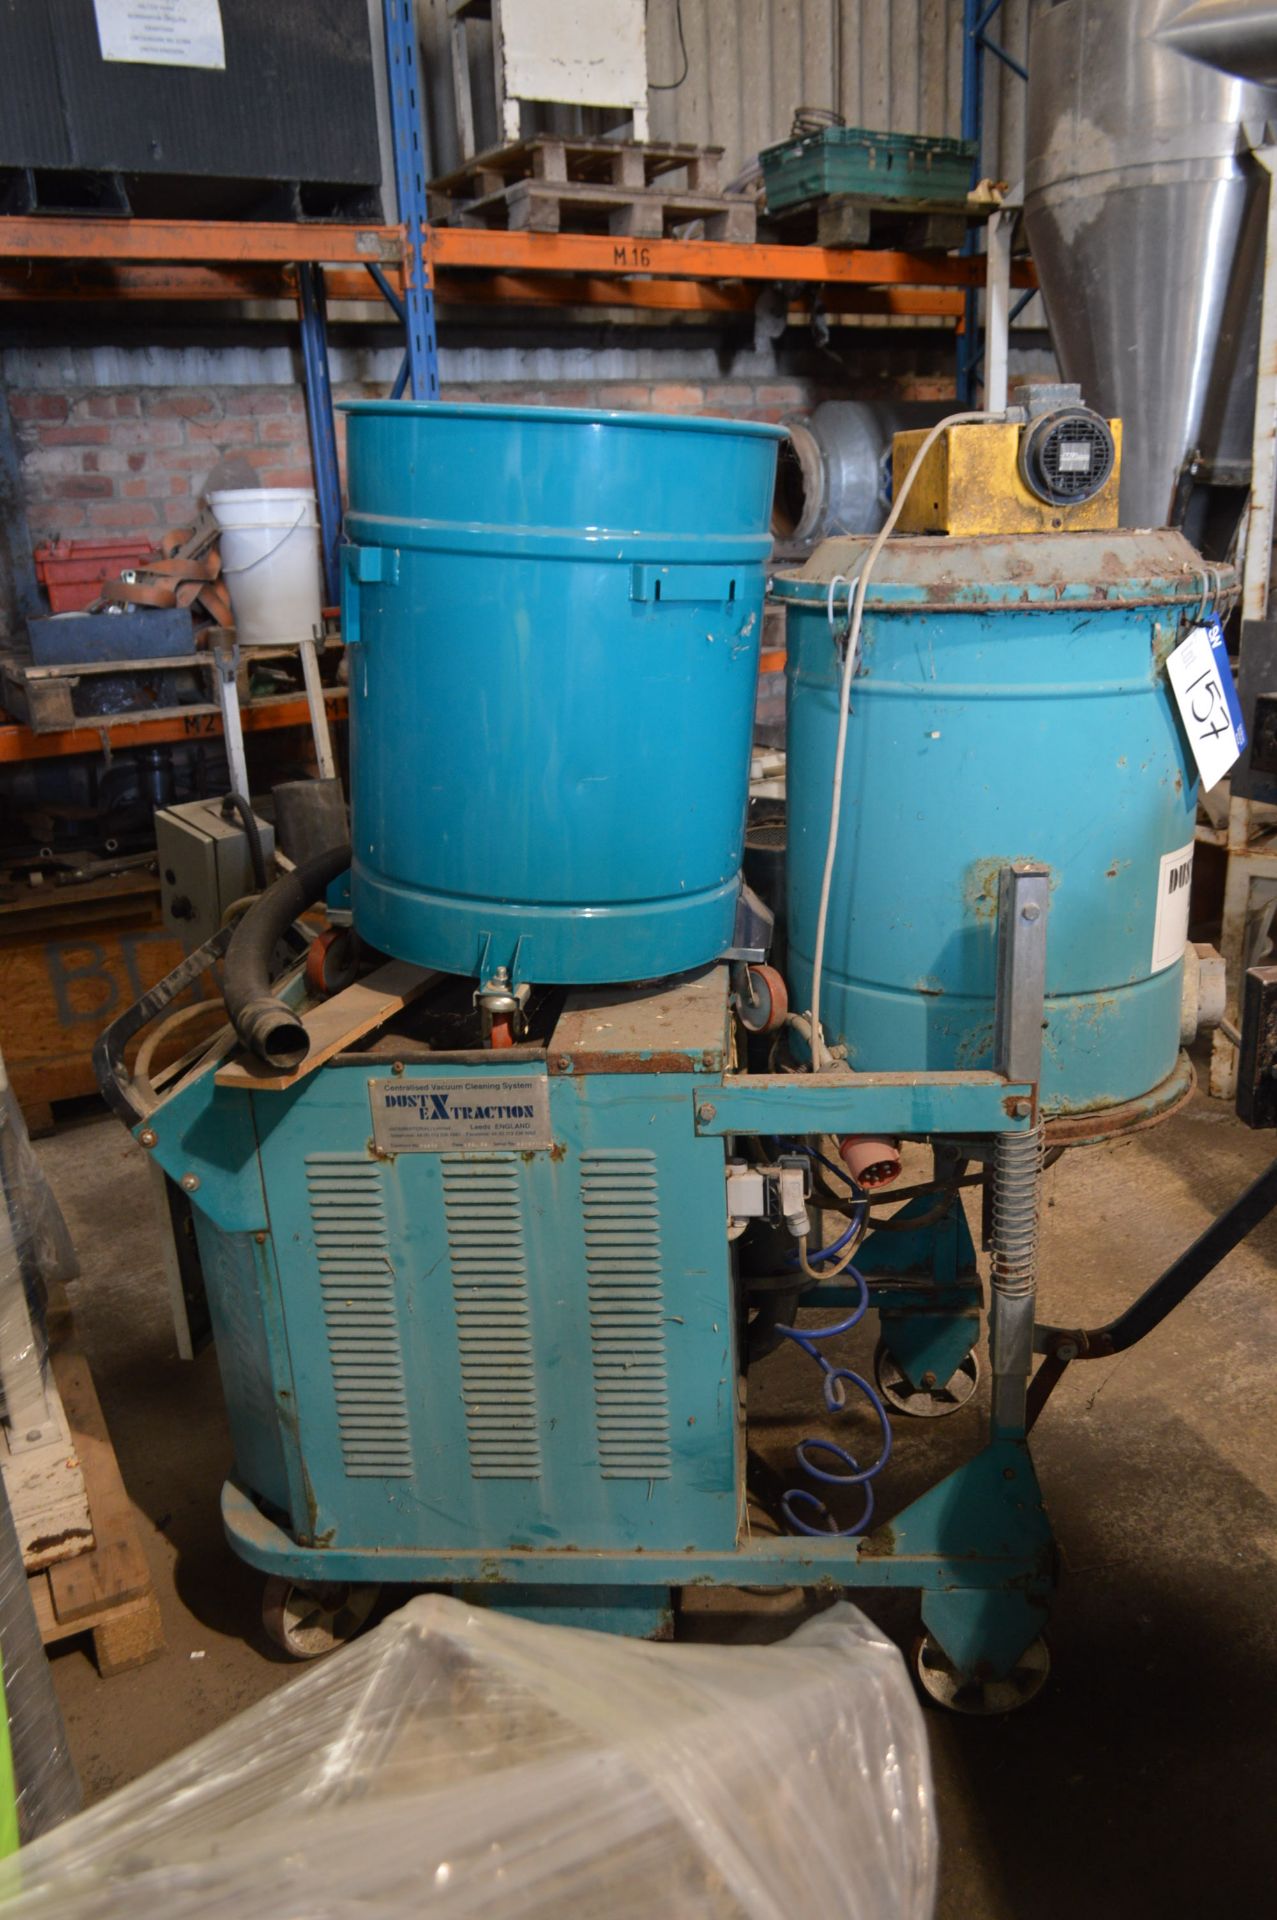 Dust Extraction Ltd 3707 Portable Industrial Vacuum System, serial no. 15610 - Image 2 of 2